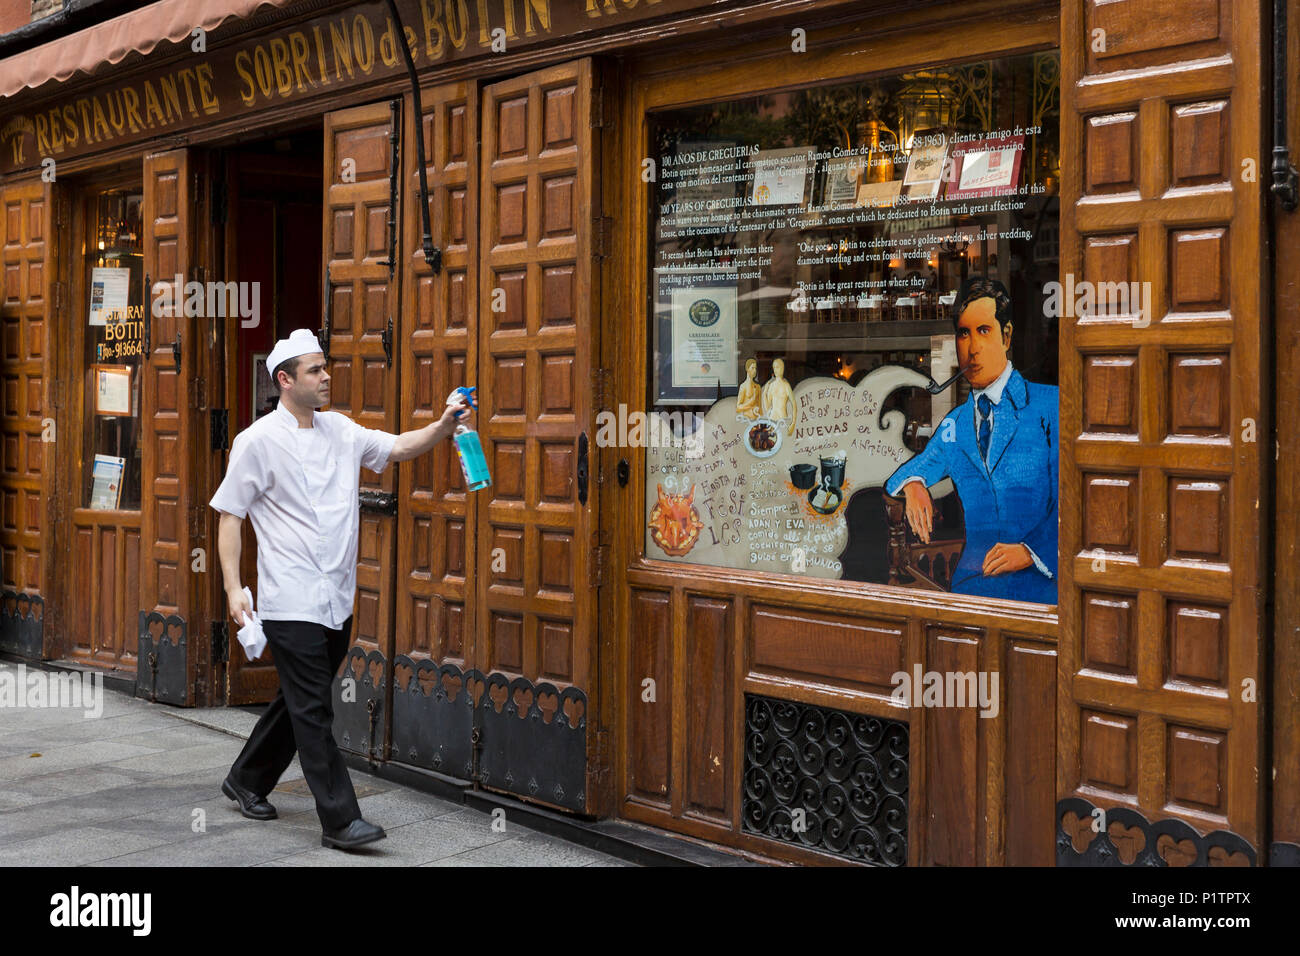 Madrid Spain A Worker Cleans The Front Window Of Restaurante Sobrino De Botin Originally Founded In 1725 As Casa Botin It Is Known As The Oldest C Stock Photo Alamy